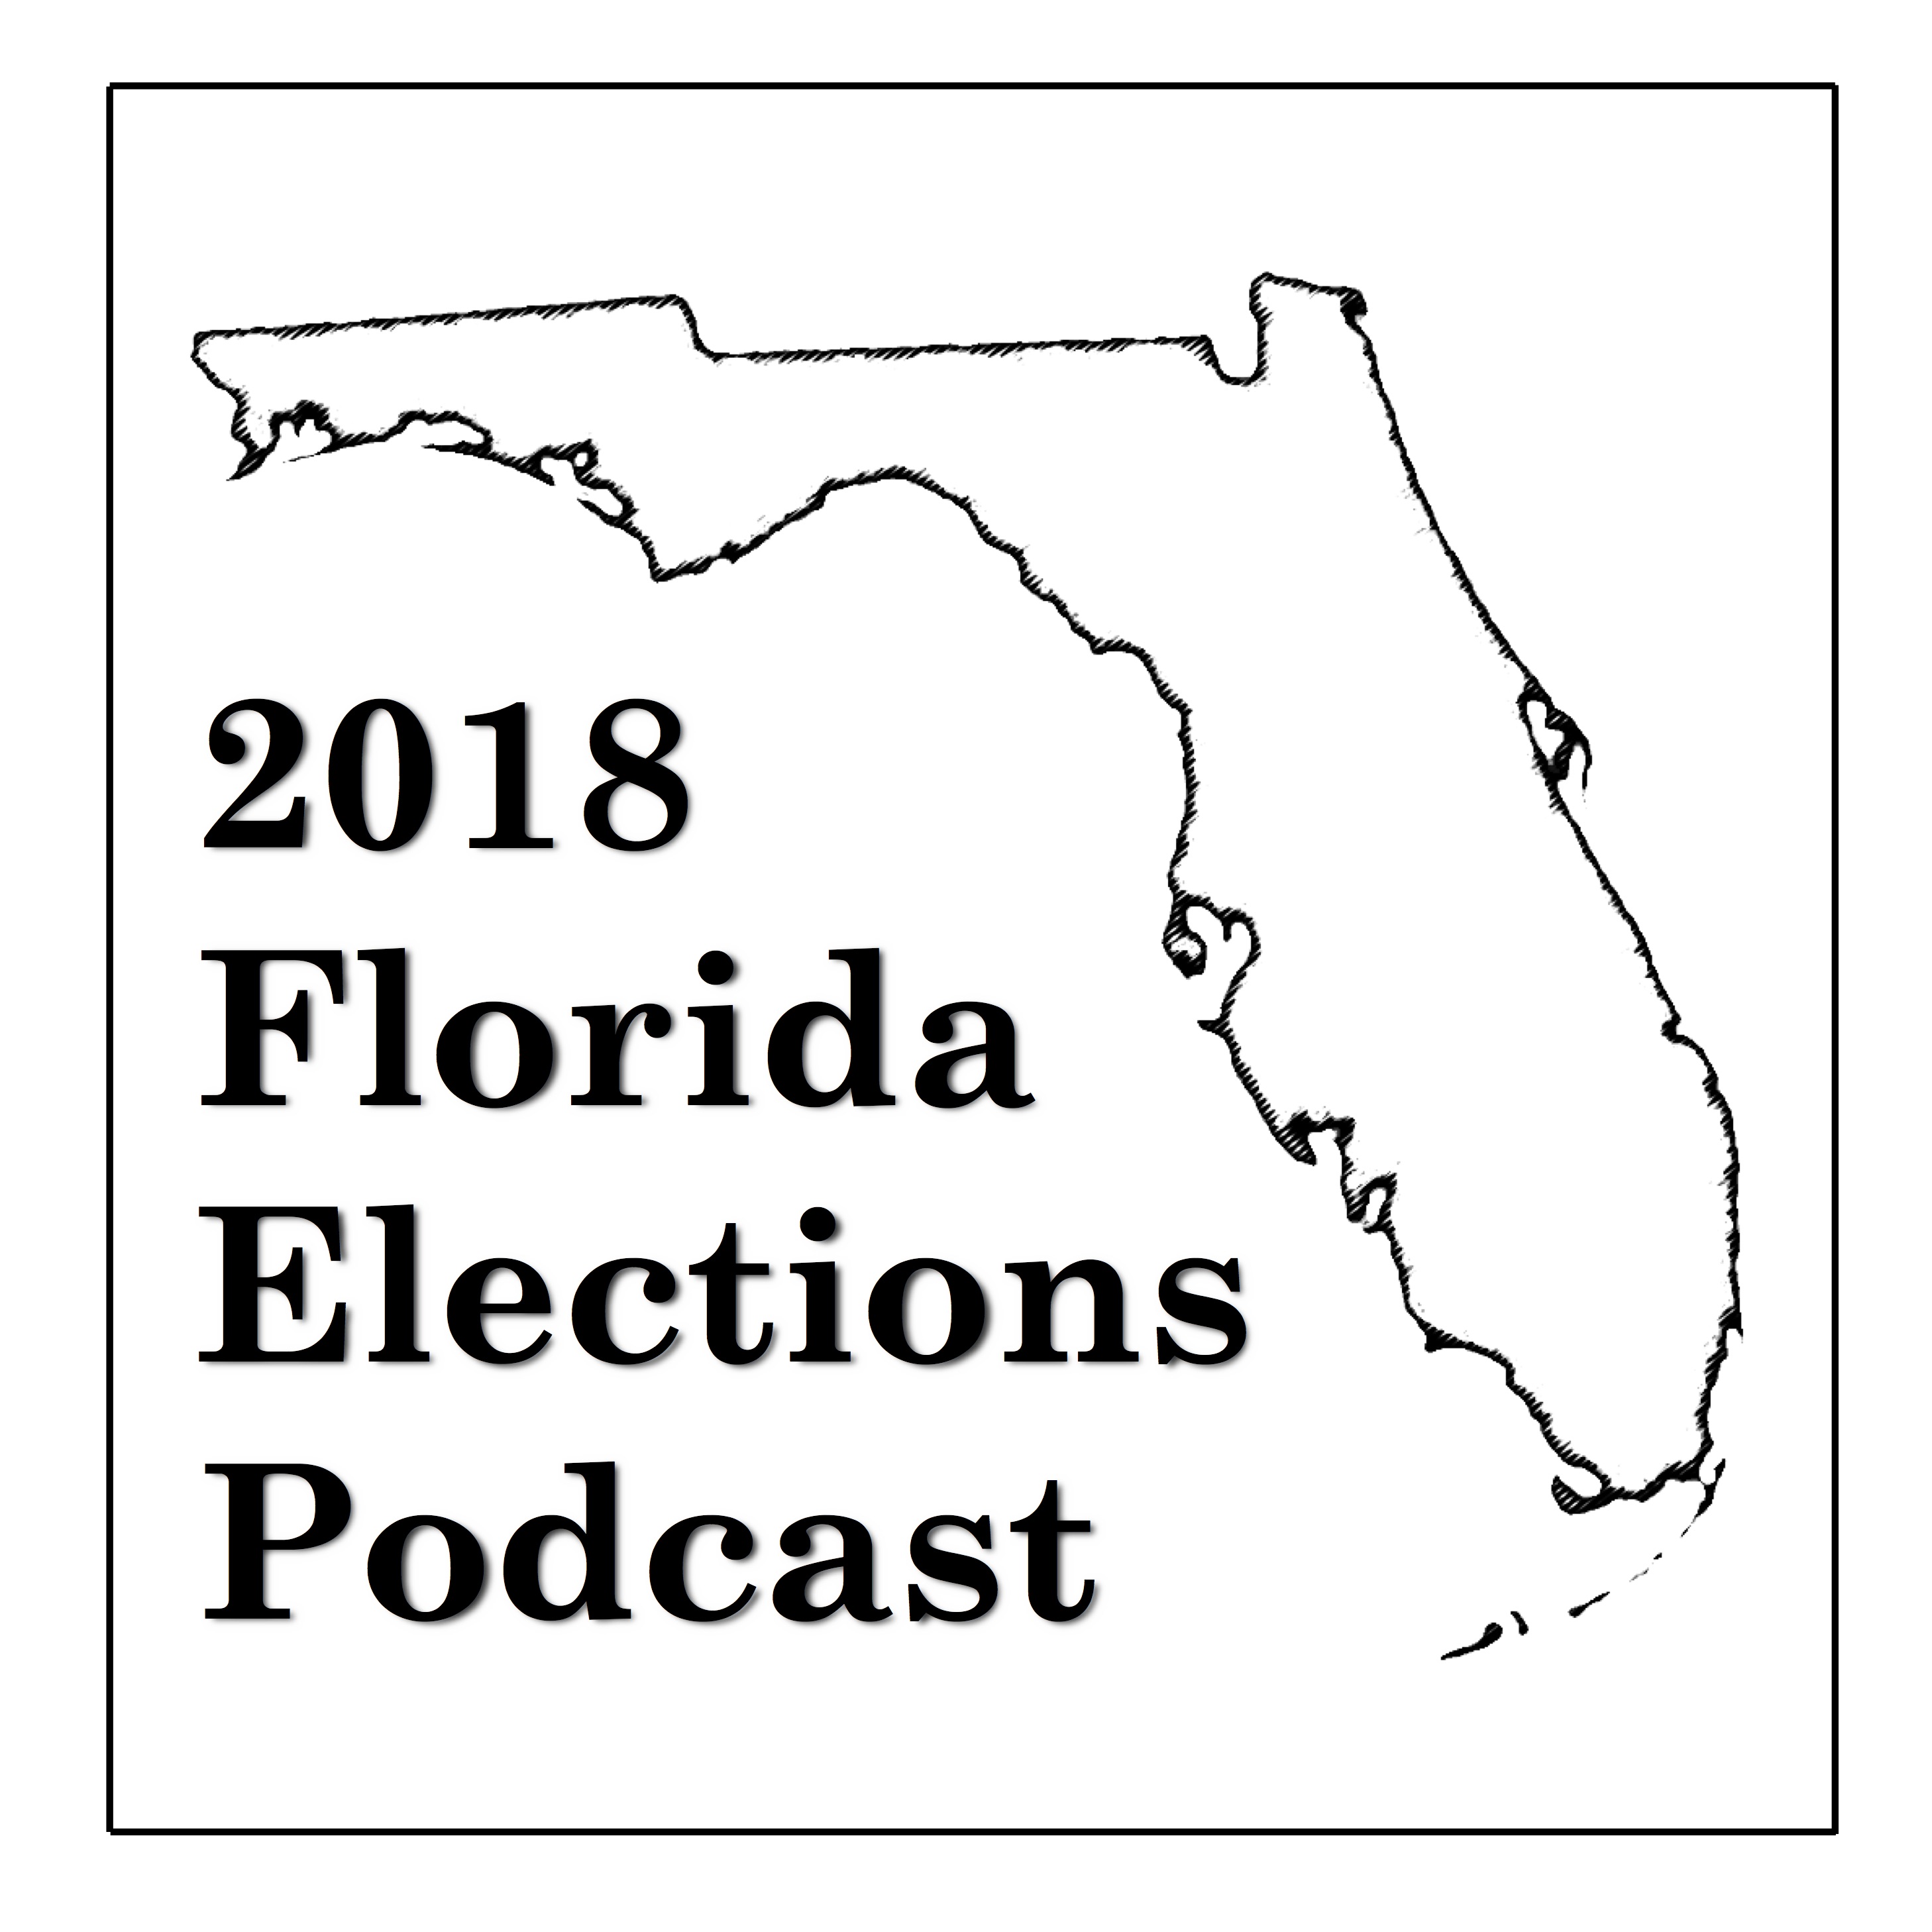 2018 Florida Elections Podcast